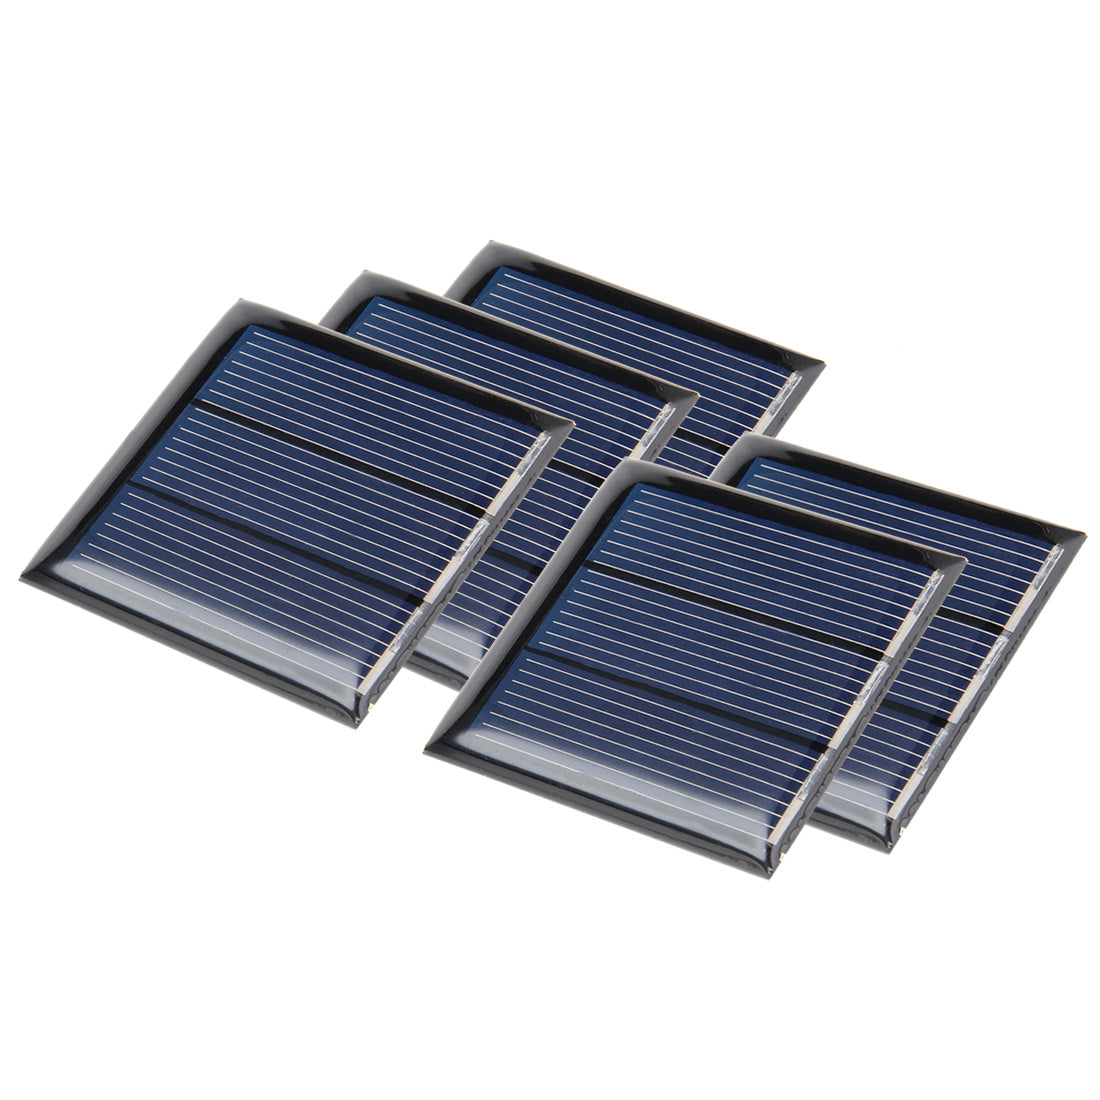 uxcell Uxcell 5Pcs 1.5V 150mA Poly Mini Solar Cell Panel Module DIY for Light Toys Charger 45mm x 45mm